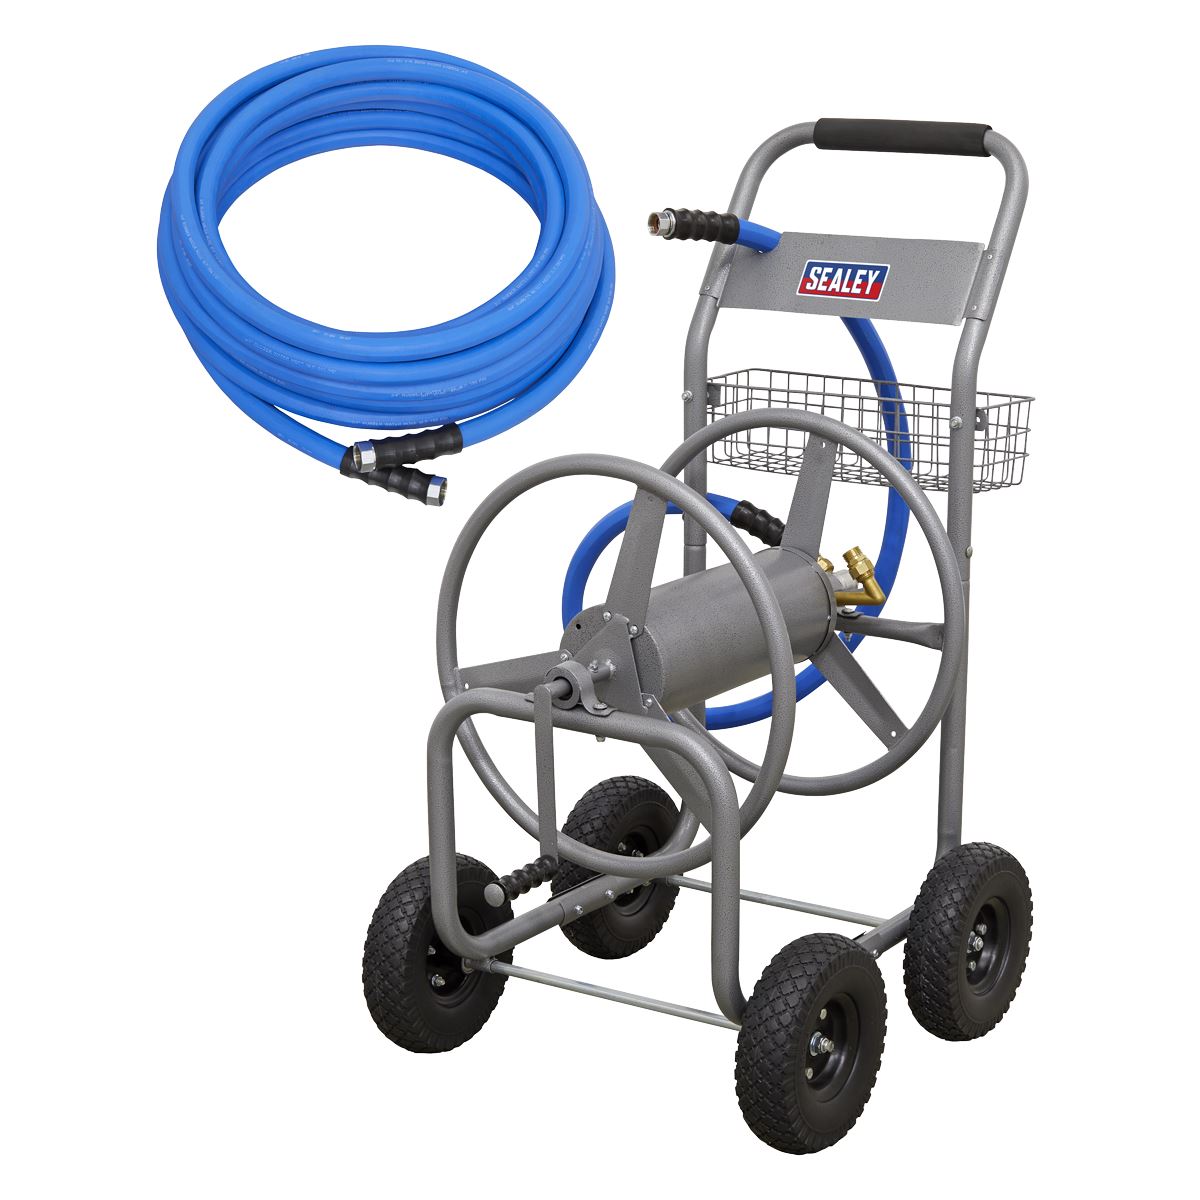 Sealey Heavy-Duty Hose Reel Cart with 5m Heavy-Duty Ø19mm Hot & Cold Rubber Water Hose